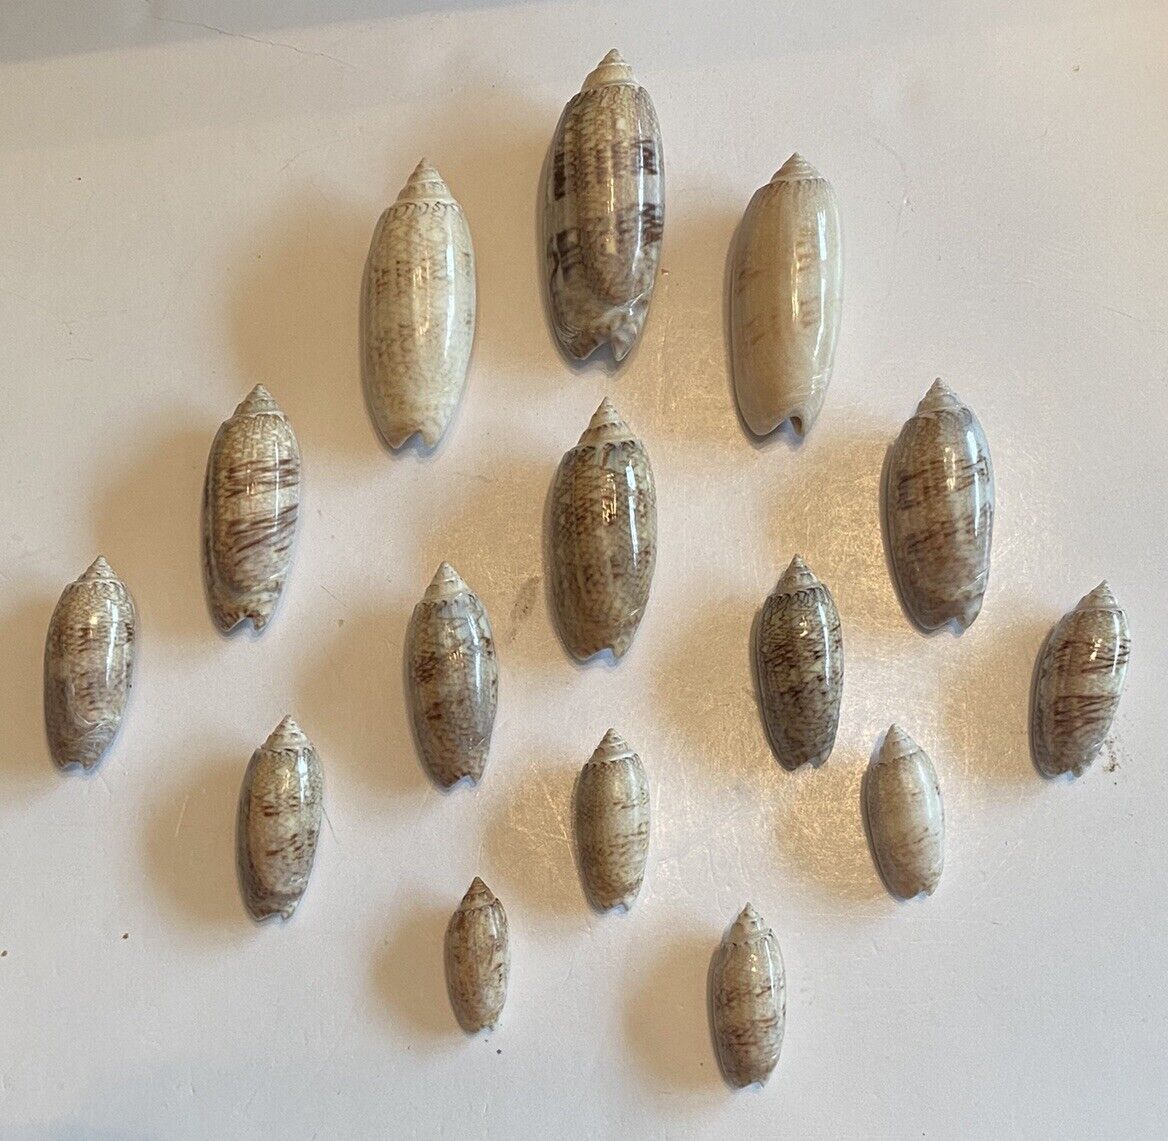 15 Beautiful Lettered Olive Shells From SW Florida